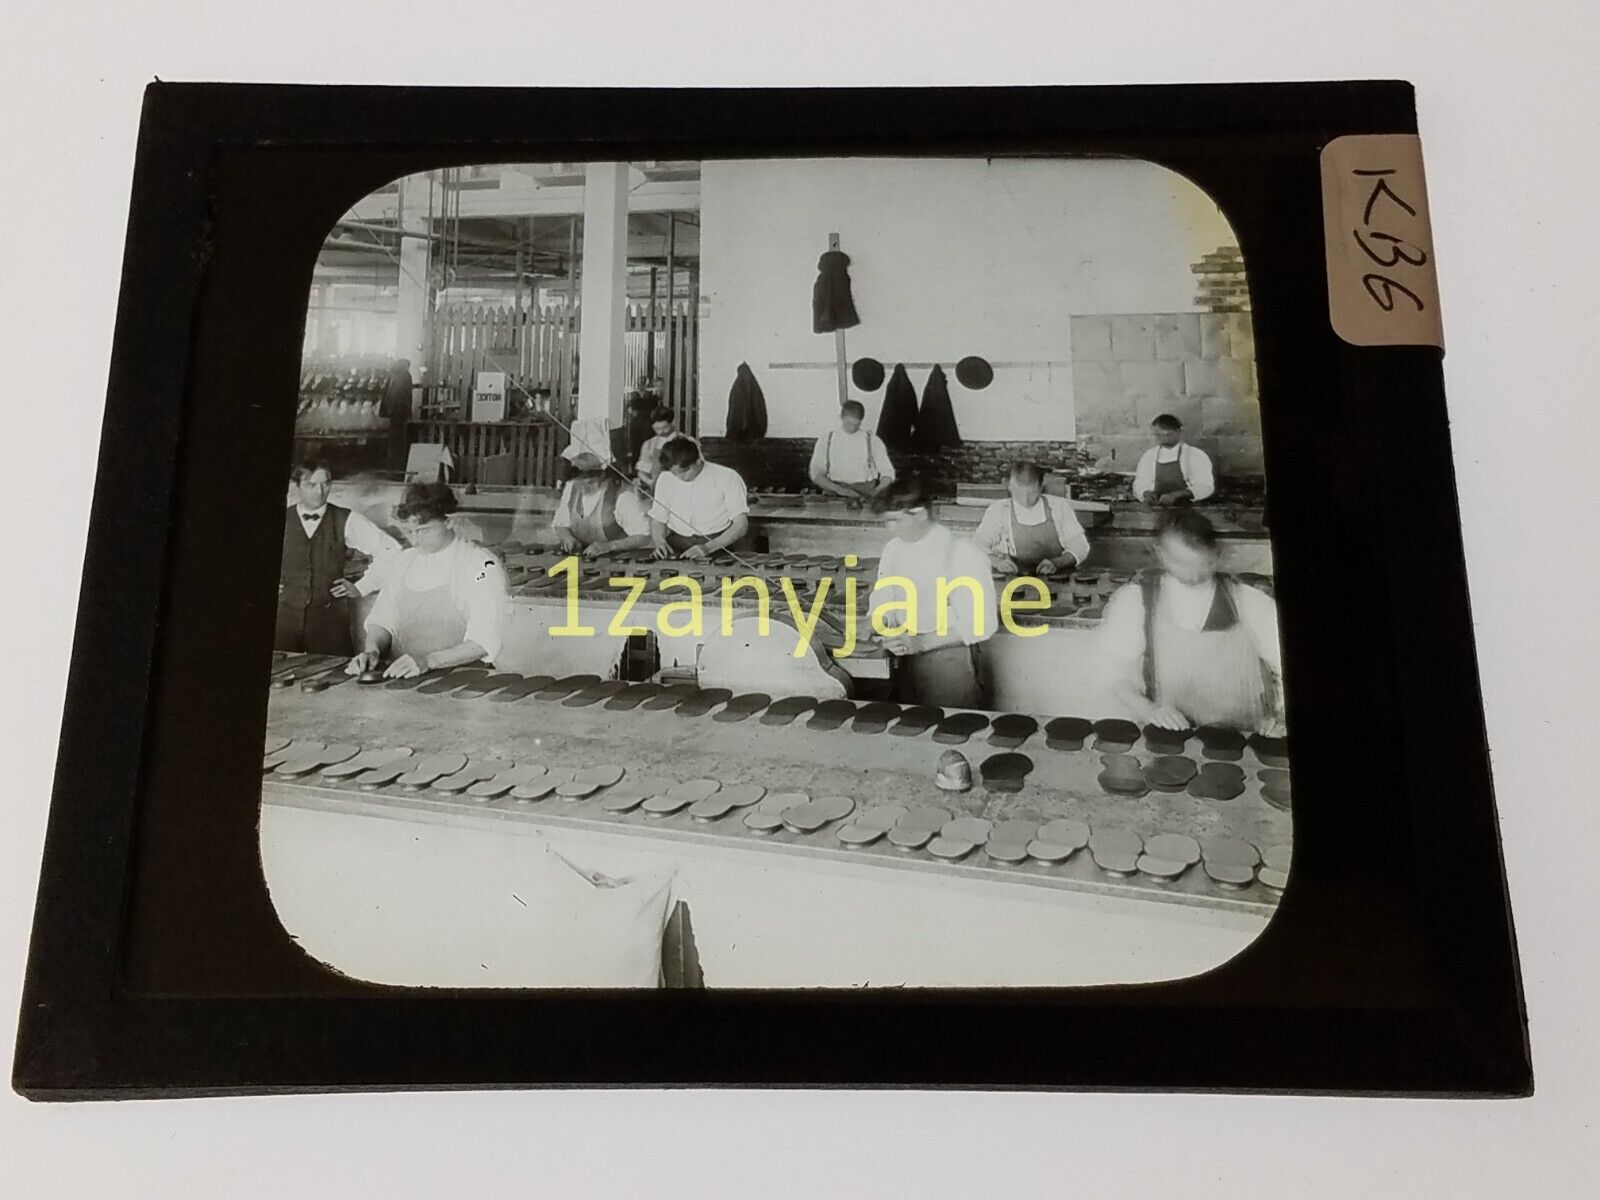 KBG HISTORIC Magic Lantern GLASS Slide WORKERS IN FACTORY PRODUCTION LINE